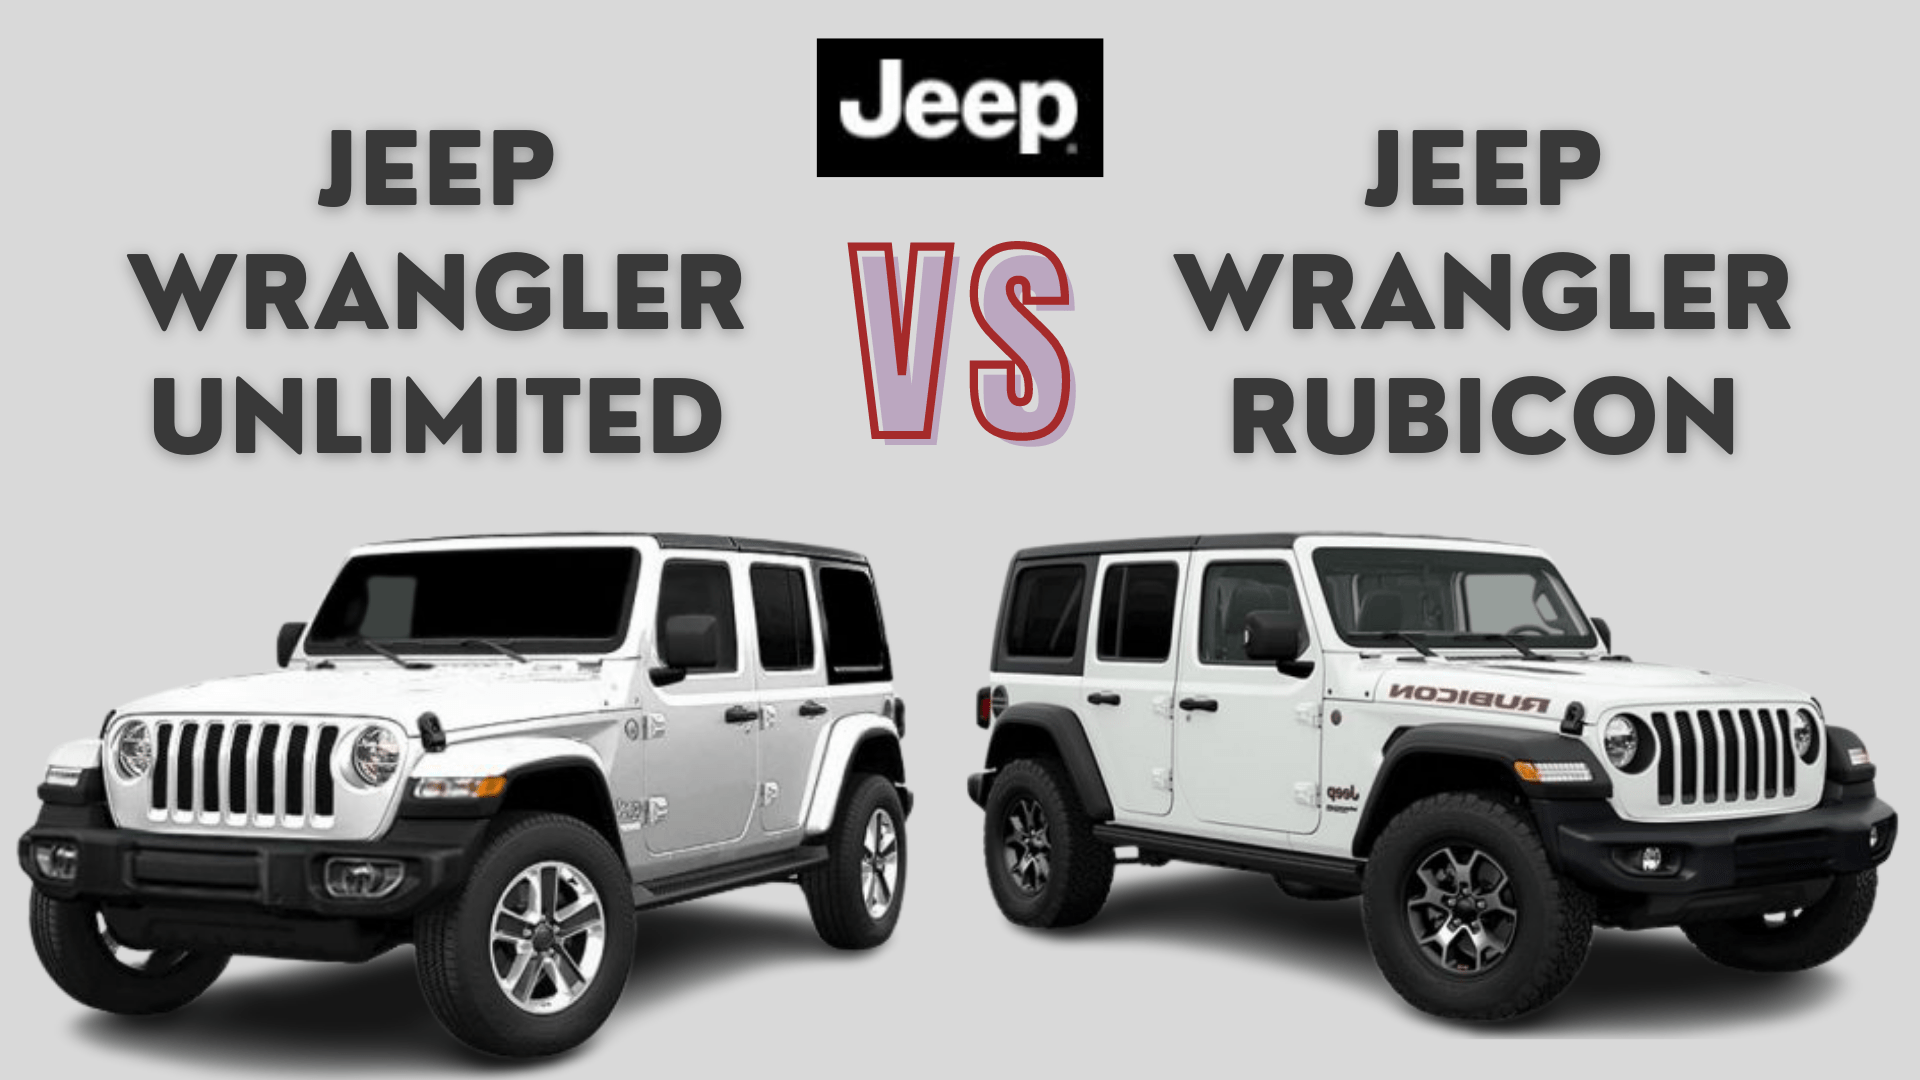 Arriba 47+ imagen whats the difference between a wrangler and a rubicon